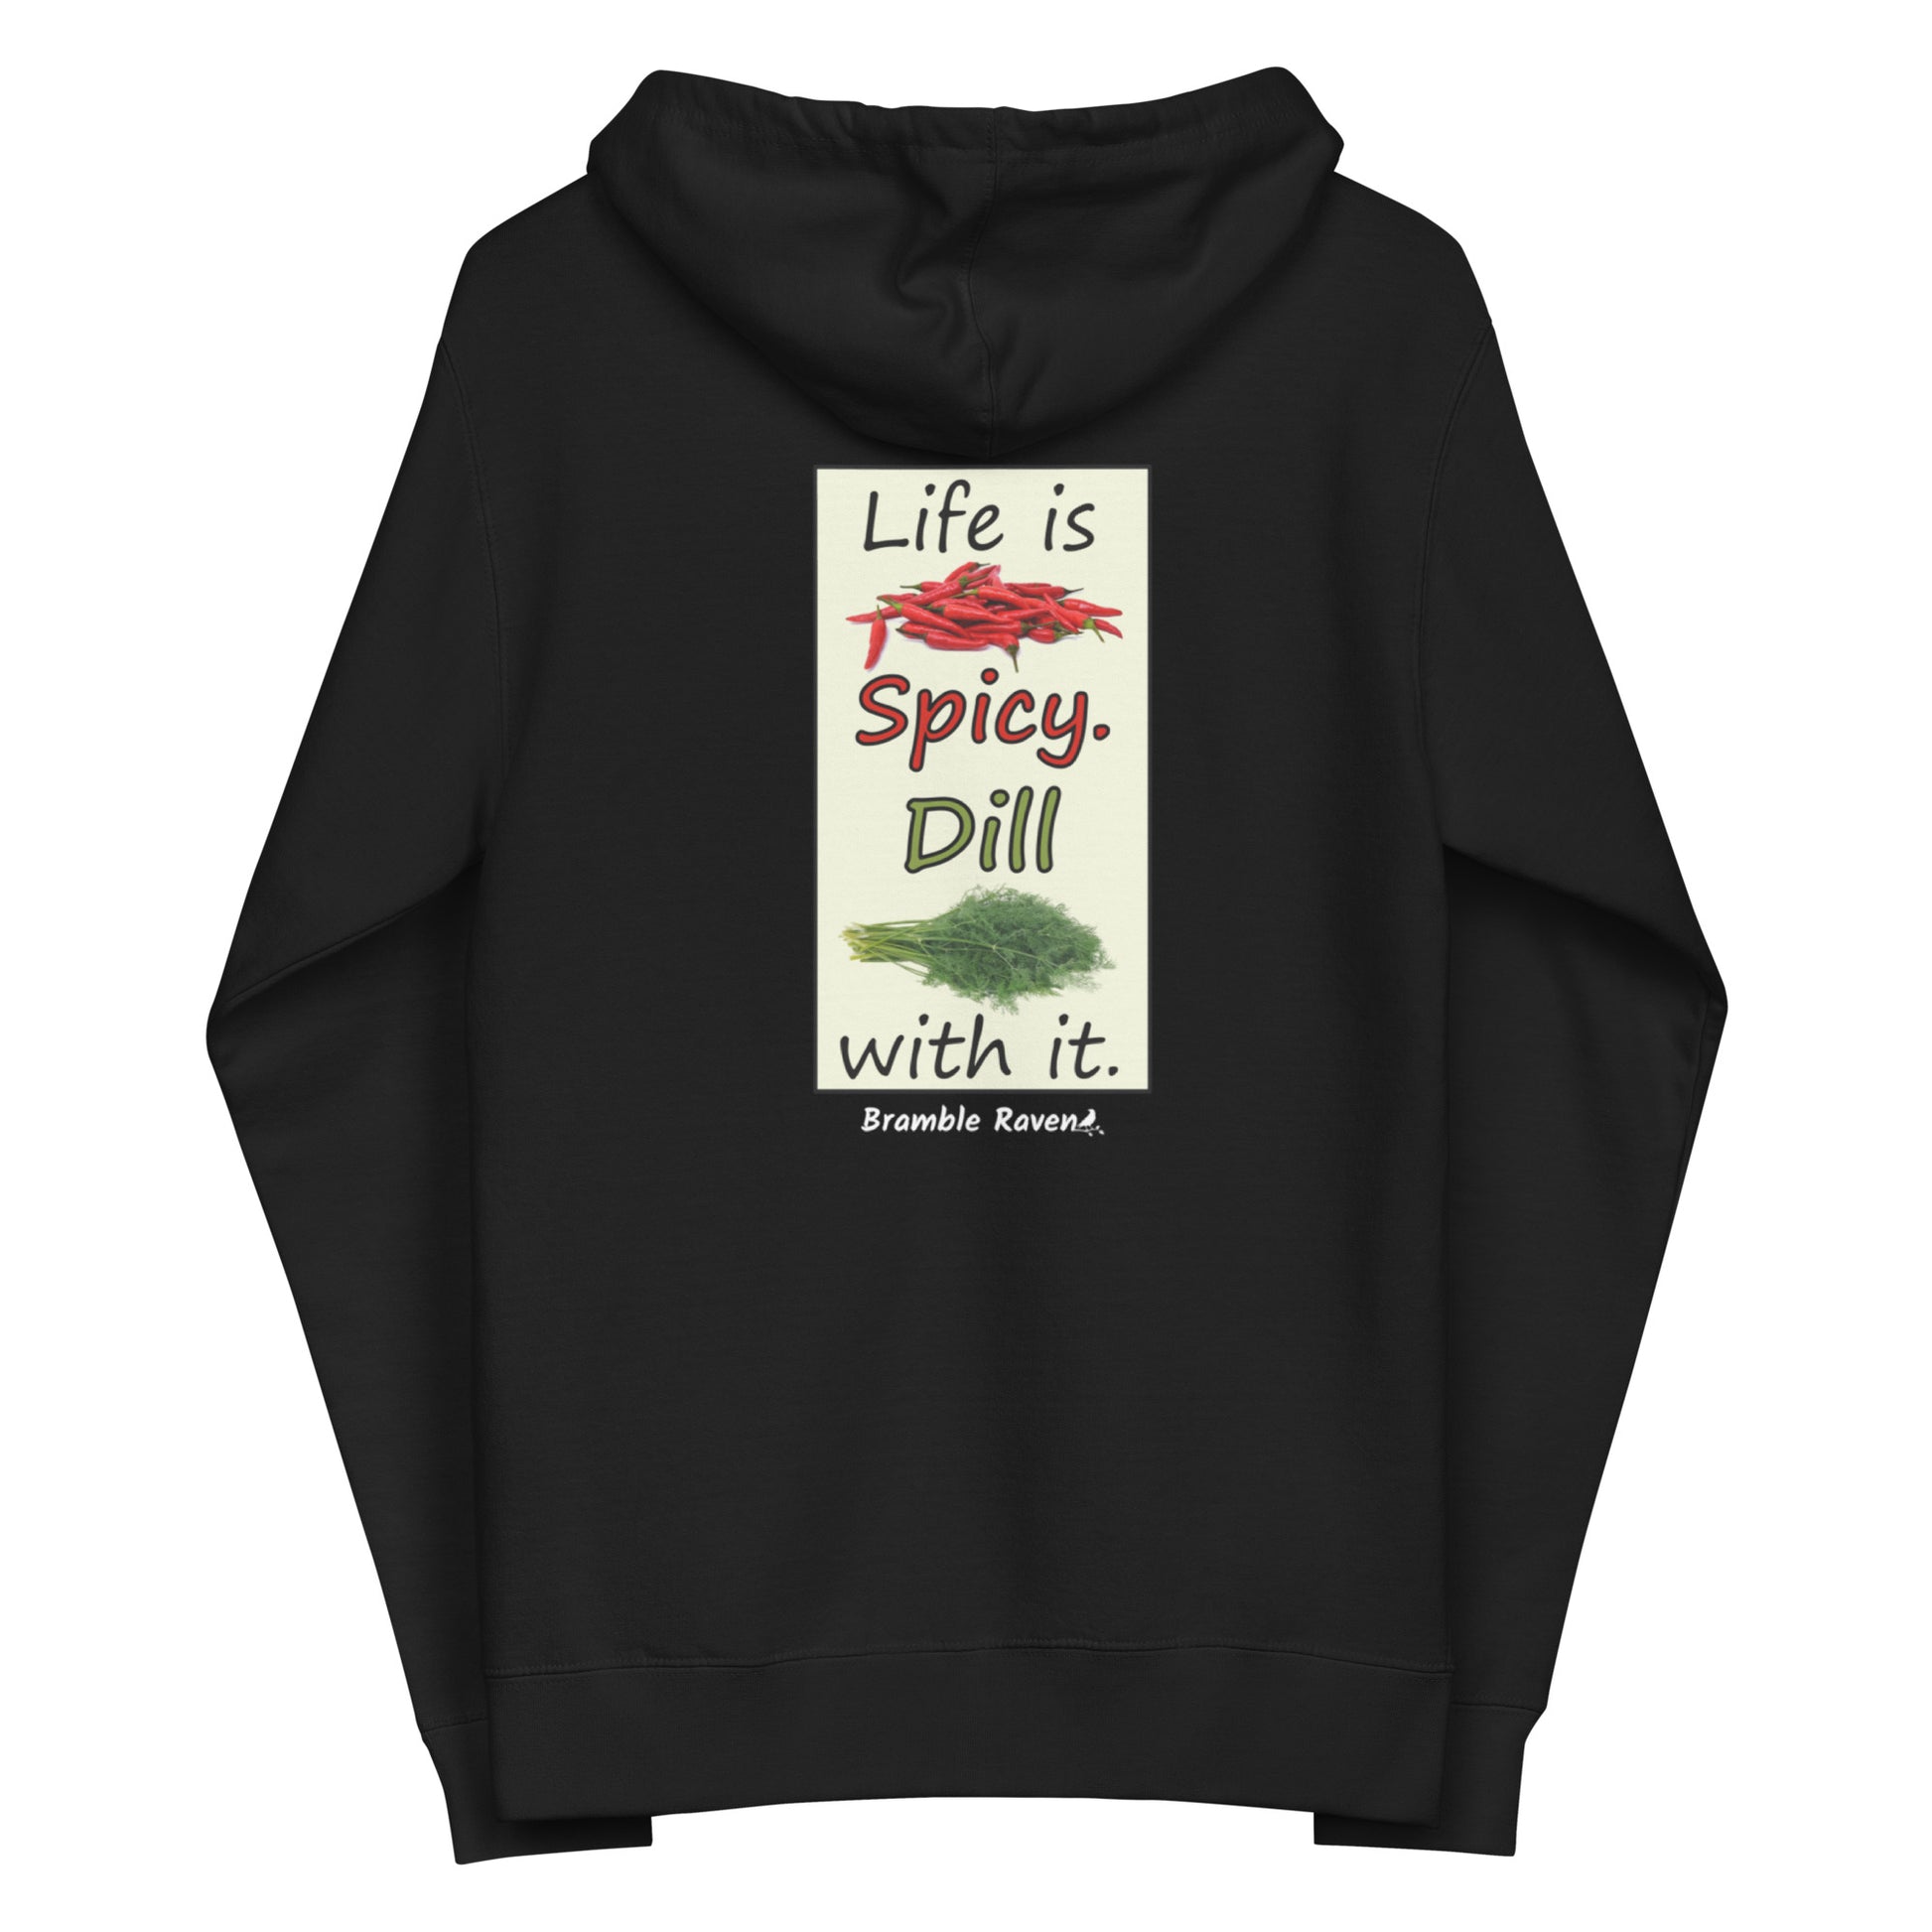 Life is spicy. Dill with it. Text with image of chili peppers and dill weed. Graphic printed on the back of unisex black zip up hoodie.